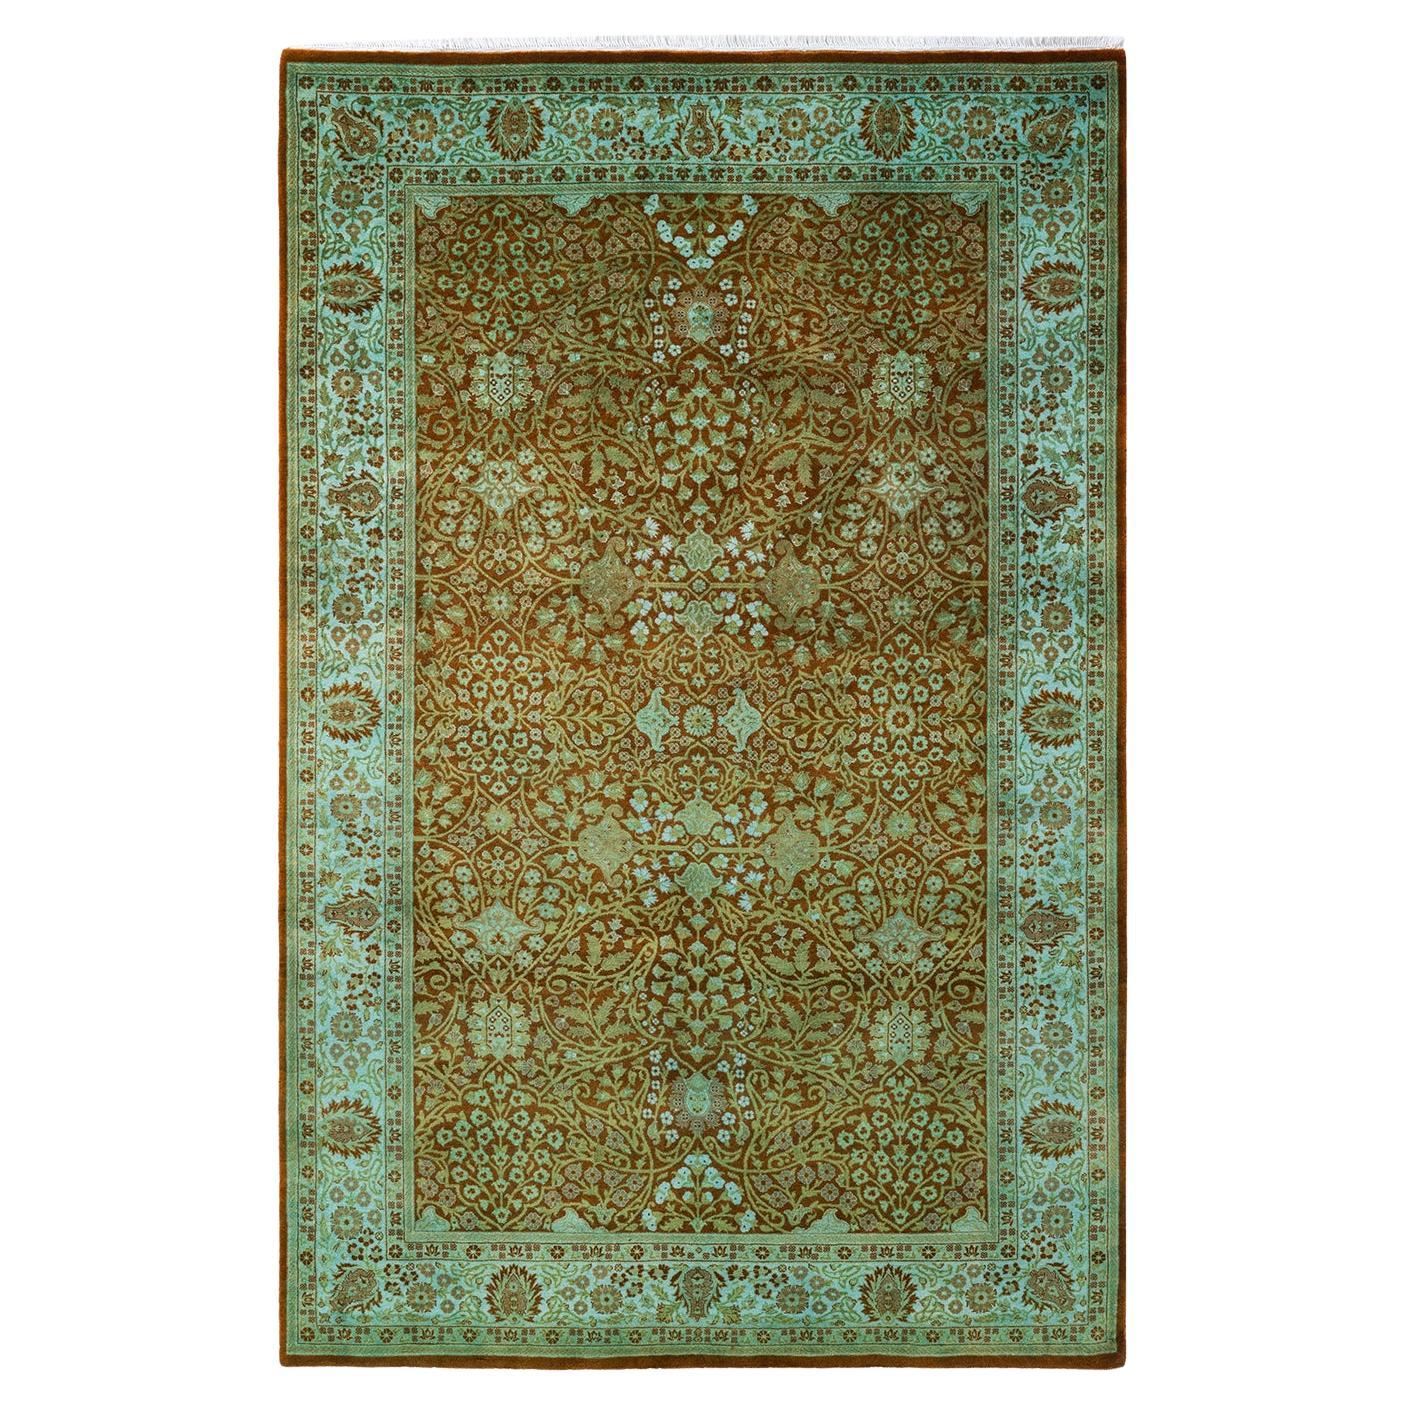 Handgeknüpfter Contemporary Overdyed Green Area Rug